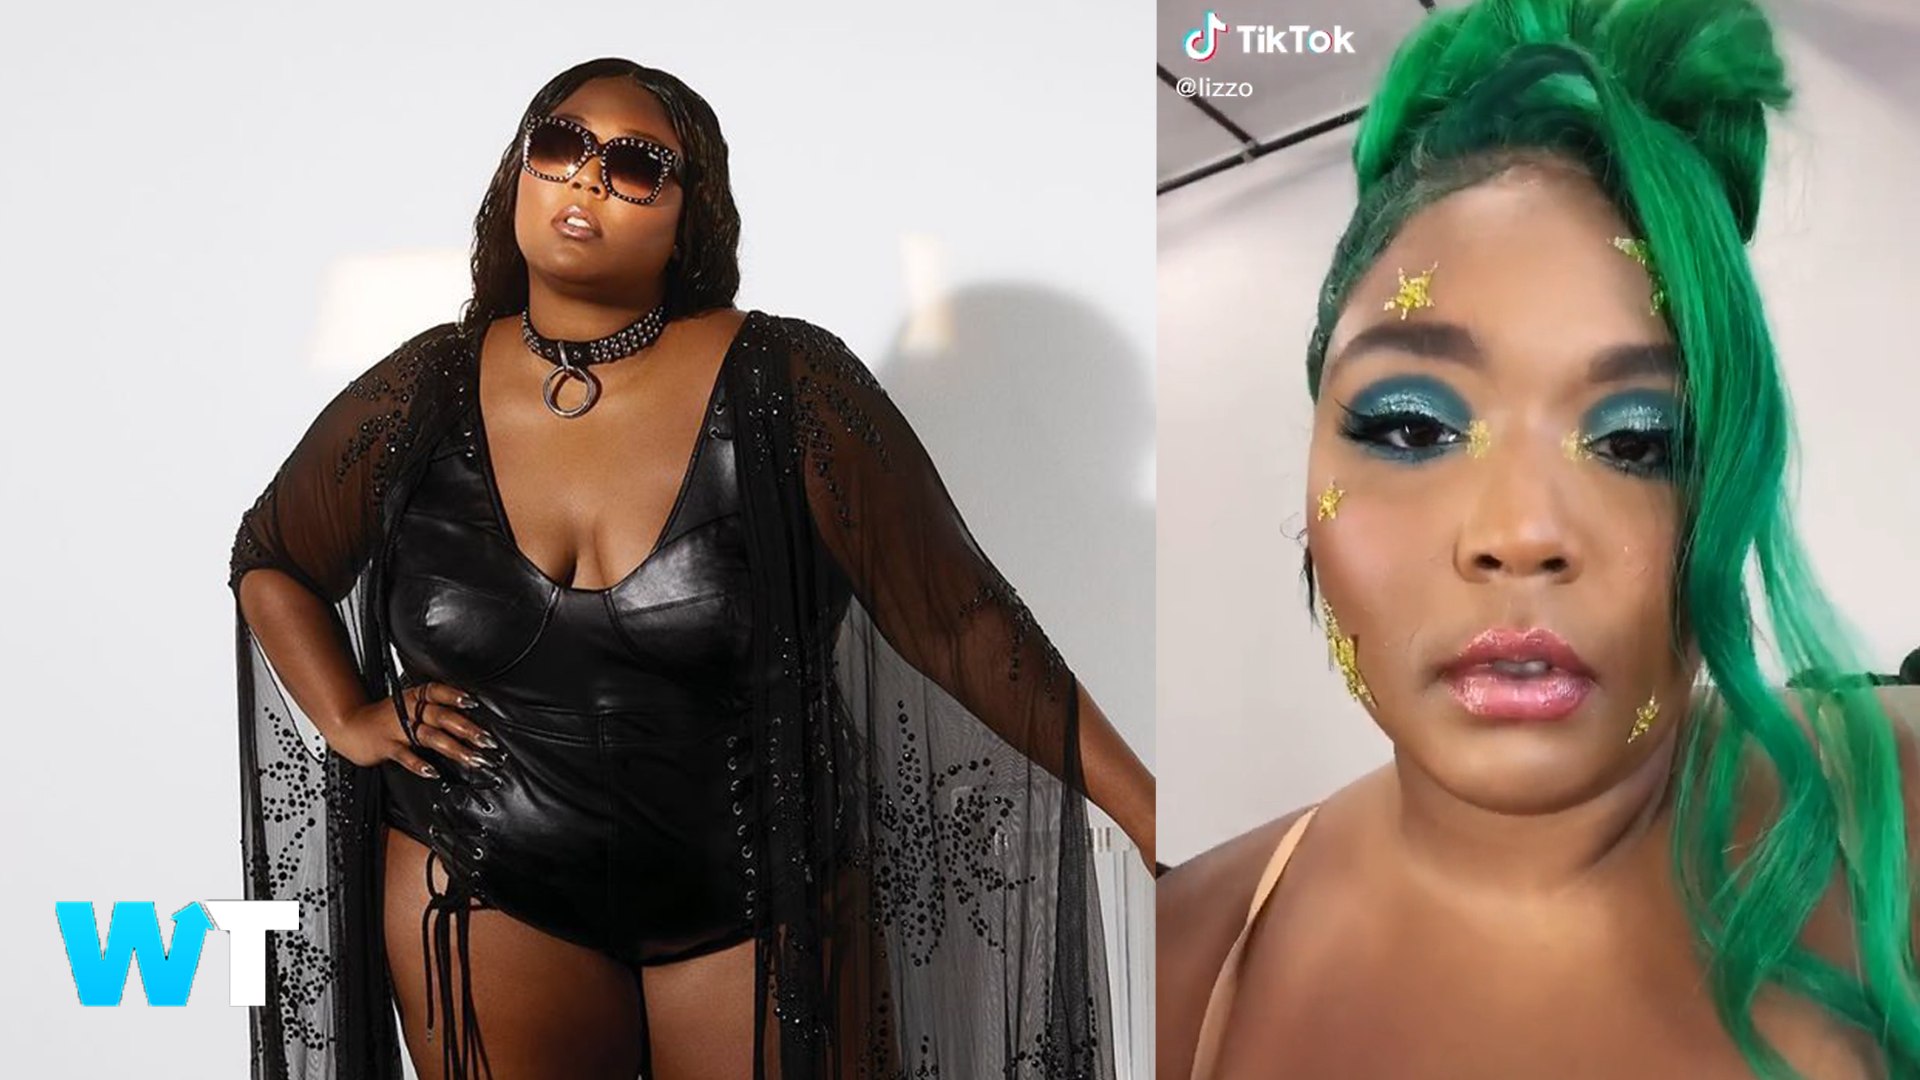 Lizzo Debuts Her New Green Hair On TikTok And Fans Are LIVING For